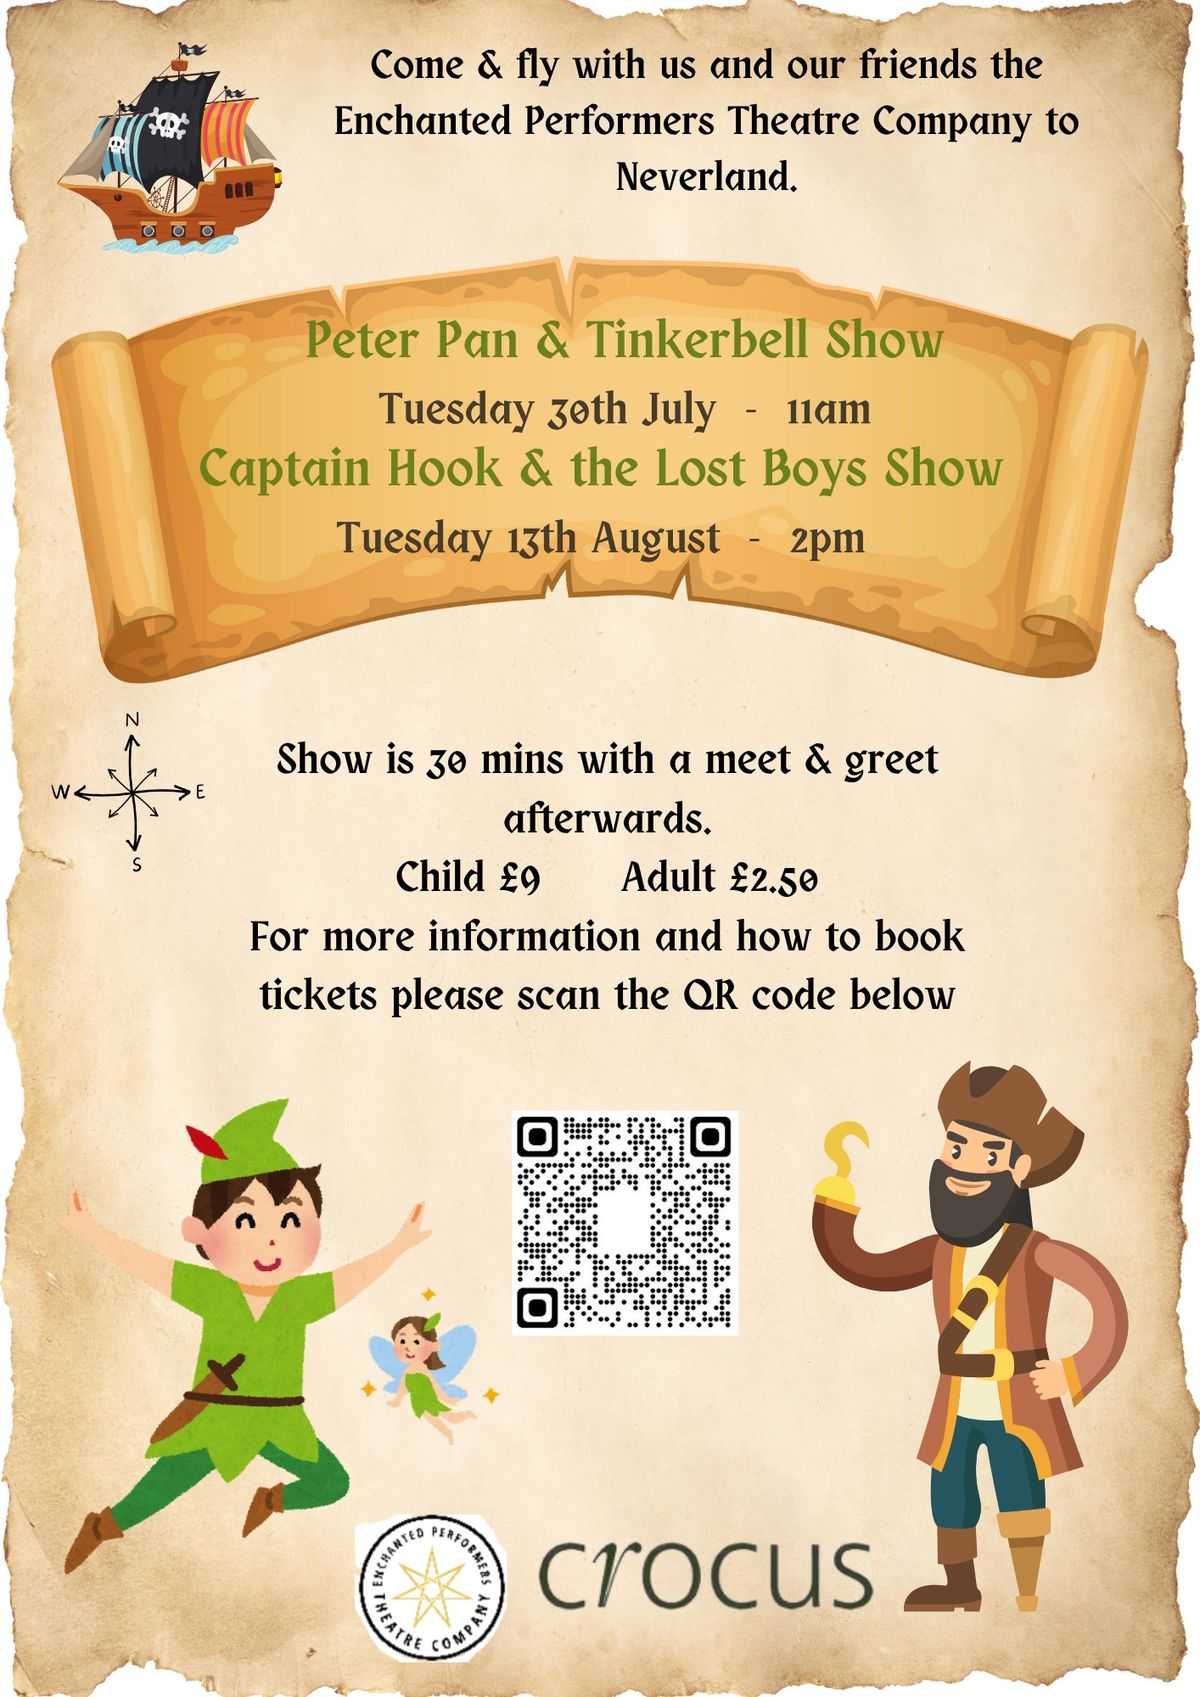 Peter Pan and Tinkerbell Show